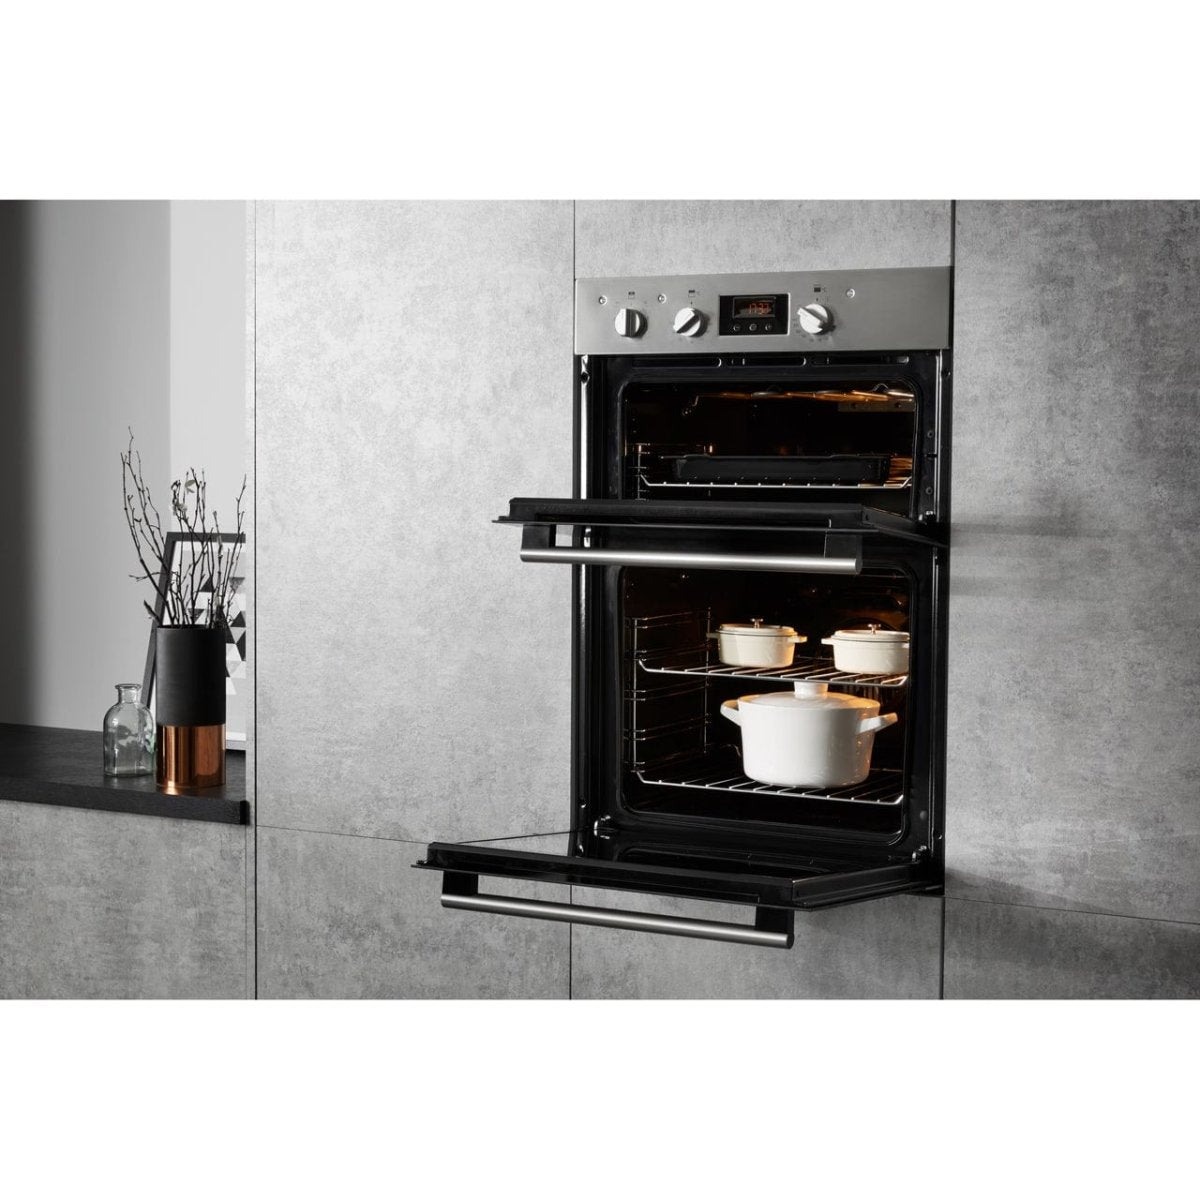 Hotpoint Class 2 DD2540IX Built In Electric Double Oven - Stainless Steel - A/A Rated - Atlantic Electrics